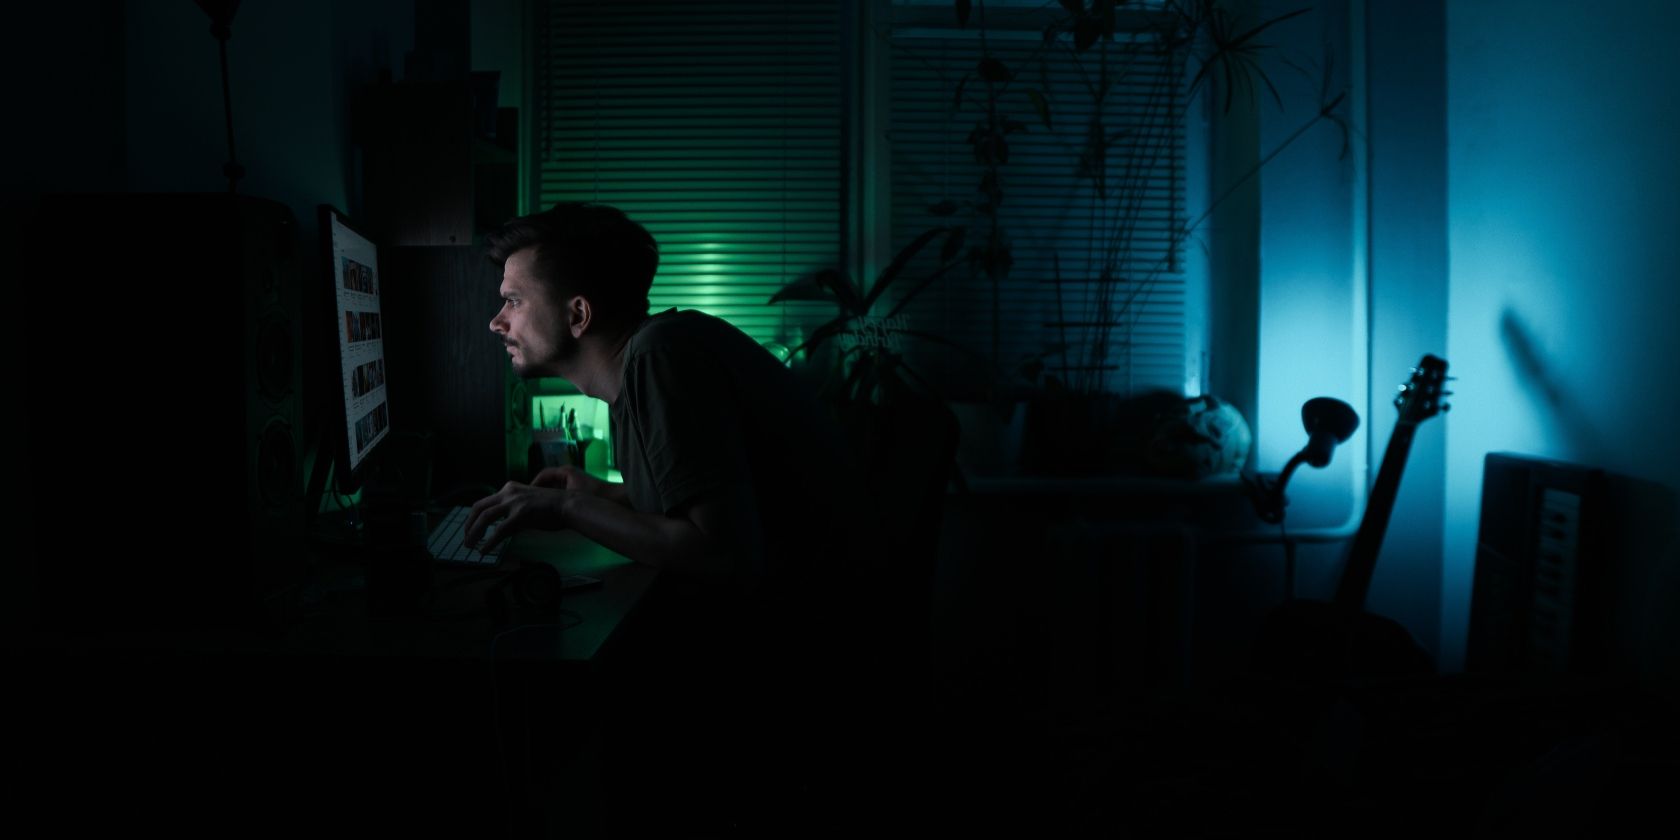 A man working in office late at night